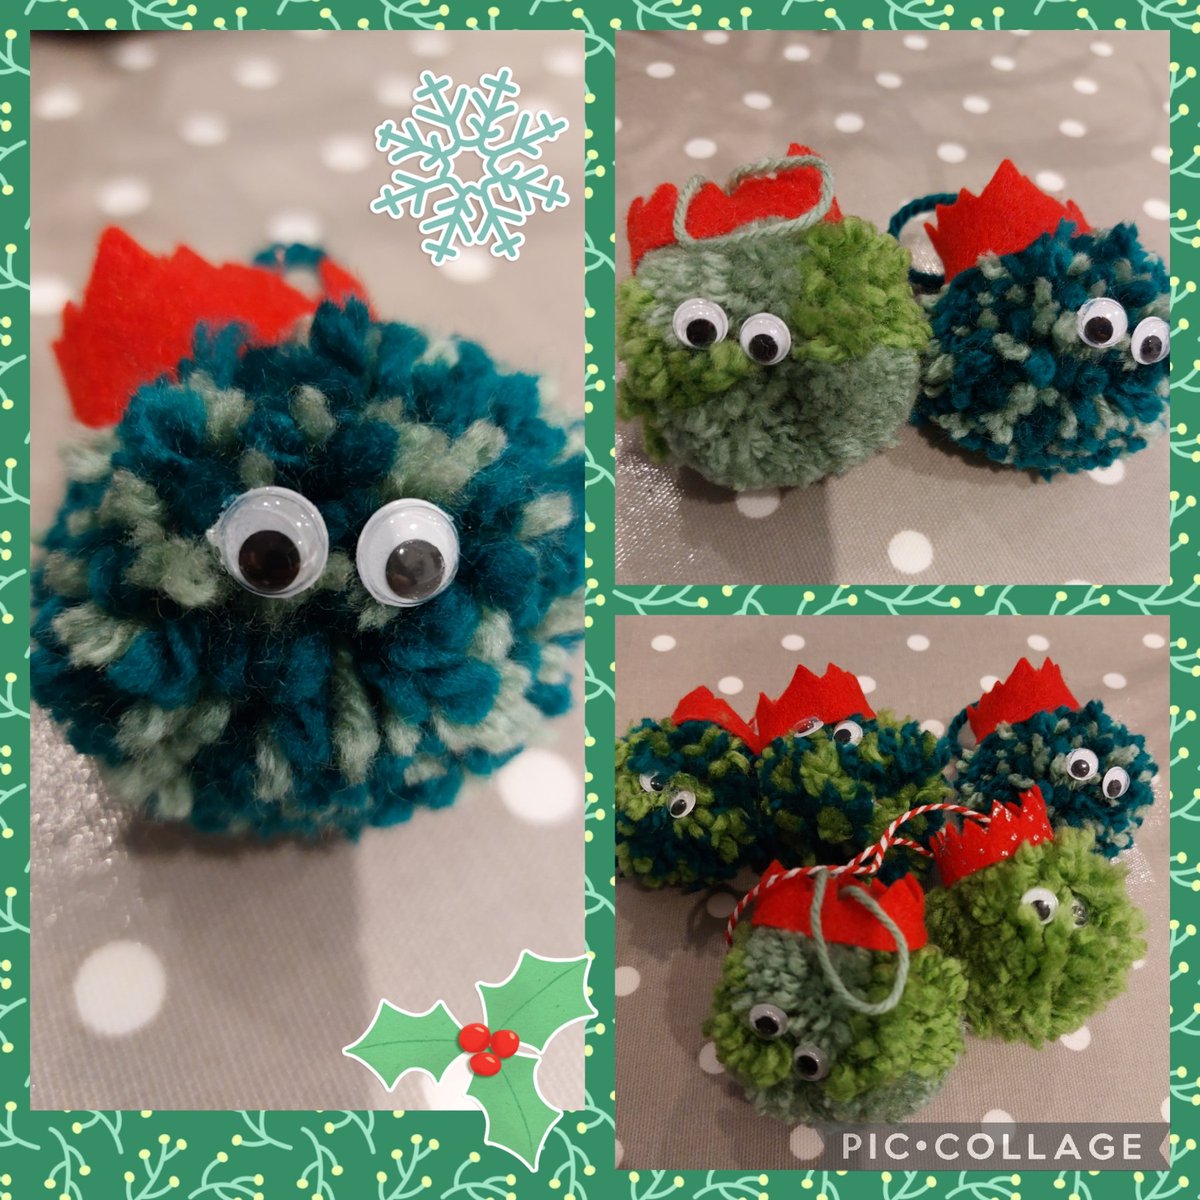 Everyone needs one if these cute guys on their #ChristmasTree handmade by students on #theautismproject @CareTradeUK visit @MIGreenwich this weekend & take one home(& see the other fab stuff they made) #supportingindependentshops #greenwich @GSTT @cosouthwark @Royal_Greenwich